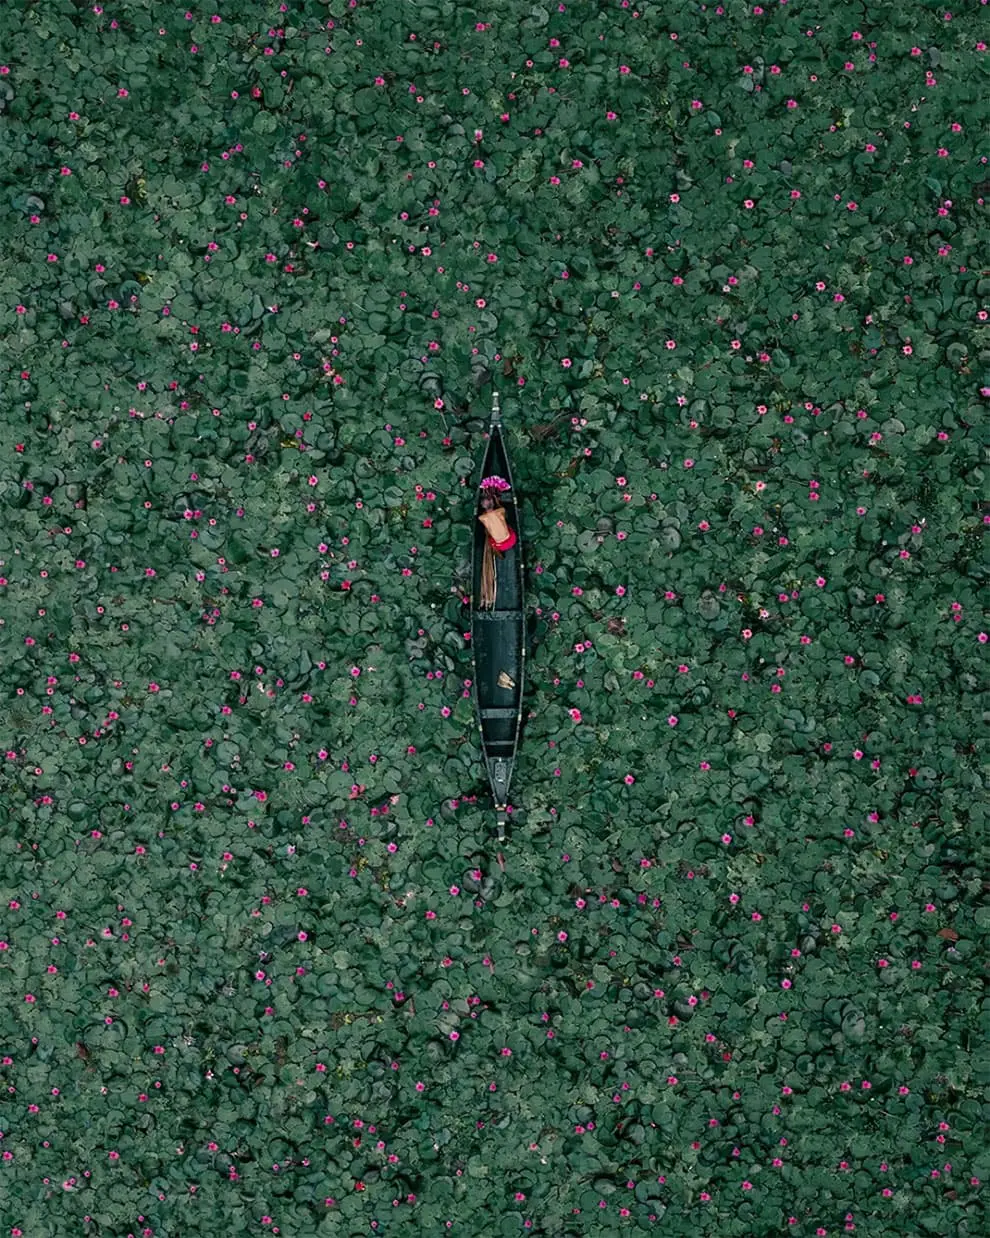 Lilies Seen by Drone 1